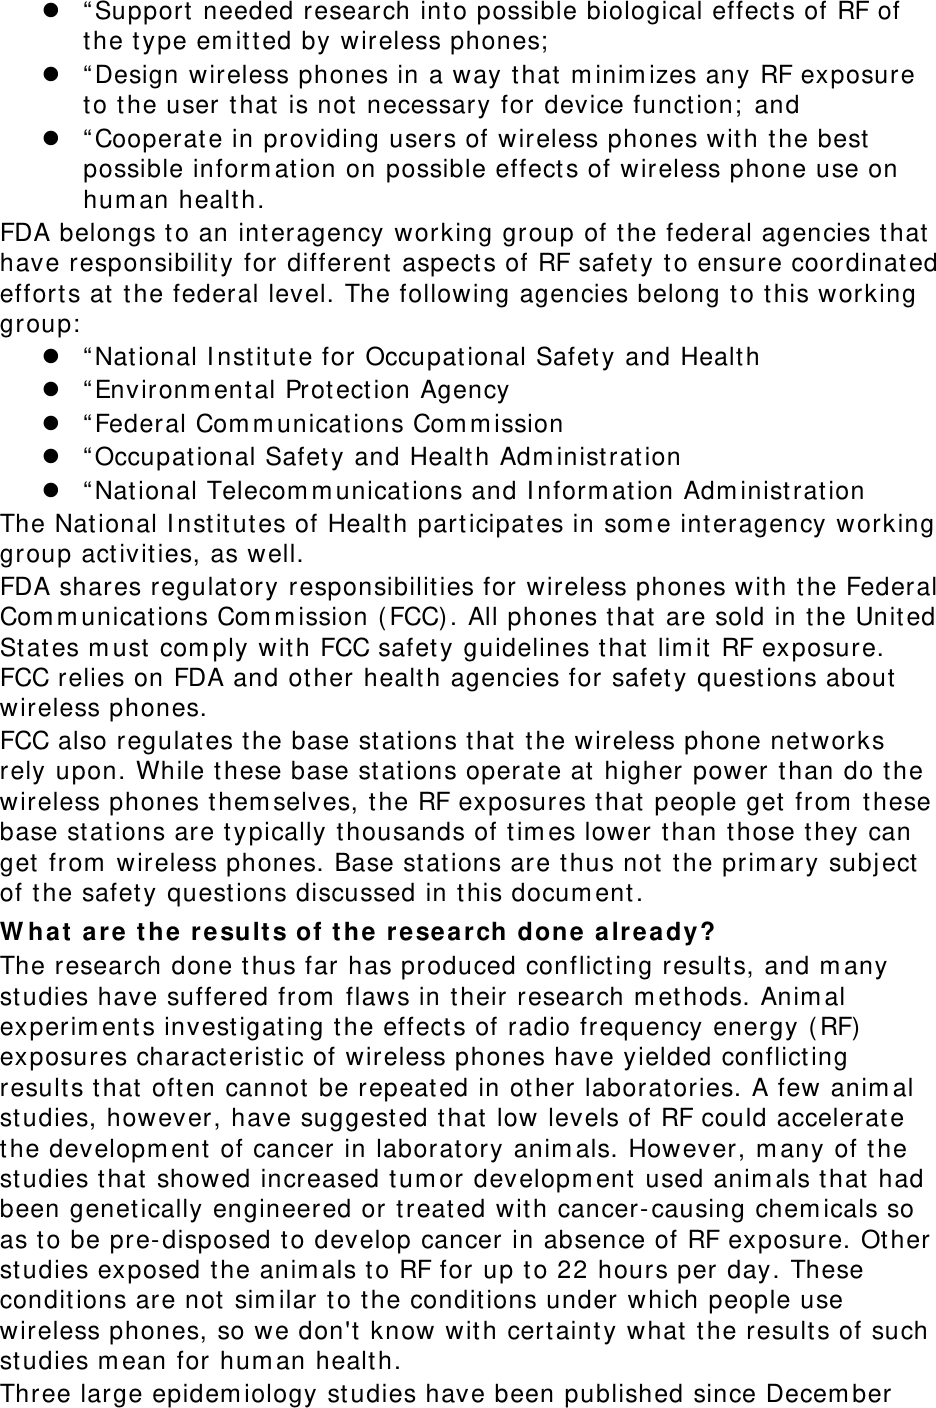  “ Support needed research int o possible biological effect s of RF of the t ype em it t ed by wireless phones;   “ Design wireless phones in a way t hat  m inim izes any RF exposure to t he user t hat  is not necessary for device funct ion;  and  “ Cooperat e in providing users of wireless phones wit h t he best possible inform at ion on possible effect s of wireless phone use on hum an health. FDA belongs t o an interagency working group of the federal agencies t hat  have responsibilit y for different  aspect s of RF safet y t o ensure coordinat ed efforts at  the federal level. The following agencies belong t o t his working group:   “ Nat ional I nst itut e for Occupat ional Safety and Health  “ Environm ent al Protection Agency  “ Federal Com m unicat ions Com m ission  “ Occupat ional Safety and Health Adm inist rat ion  “ Nat ional Telecom m unications and I nform at ion Adm inistrat ion The Nat ional I nst itut es of Health participat es in som e interagency working group act ivit ies, as well. FDA shares regulat ory responsibilit ies for wireless phones with t he Federal Com m unications Com m ission ( FCC) . All phones t hat  are sold in t he Unit ed St at es m ust com ply wit h FCC safet y guidelines t hat  lim it  RF exposure. FCC relies on FDA and other healt h agencies for safet y quest ions about  wireless phones. FCC also regulat es t he base st at ions that  t he wireless phone net works rely upon. While t hese base st ations operat e at  higher power than do the wireless phones t hem selves, t he RF exposures t hat  people get  from  t hese base stat ions are t ypically t housands of t im es lower t han those they can get  from  wireless phones. Base st ations are t hus not t he prim ary subj ect  of t he safet y quest ions discussed in t his docum ent . W hat  a r e  t he result s of t he r e sea r ch don e  a lrea dy? The research done t hus far has produced conflict ing result s, and m any studies have suffered from  flaws in t heir research m et hods. Anim al experim ent s investigat ing t he effect s of radio frequency energy ( RF)  exposures charact erist ic of wireless phones have yielded conflict ing result s that oft en cannot  be repeated in ot her laborat ories. A few anim al studies, however, have suggest ed that low levels of RF could accelerat e the developm ent  of cancer in laborat ory anim als. However, m any of t he studies that showed increased t um or developm ent used anim als t hat  had been genet ically engineered or t reated wit h cancer- causing chem icals so as to be pre- disposed to develop cancer in absence of RF exposure. Other studies exposed t he anim als t o RF for up t o 22 hours per day. These condit ions are not  sim ilar to t he condit ions under which people use wireless phones, so we don&apos;t  know wit h certainty what  t he result s of such studies m ean for hum an health. Three large epidem iology st udies have been published since Decem ber 